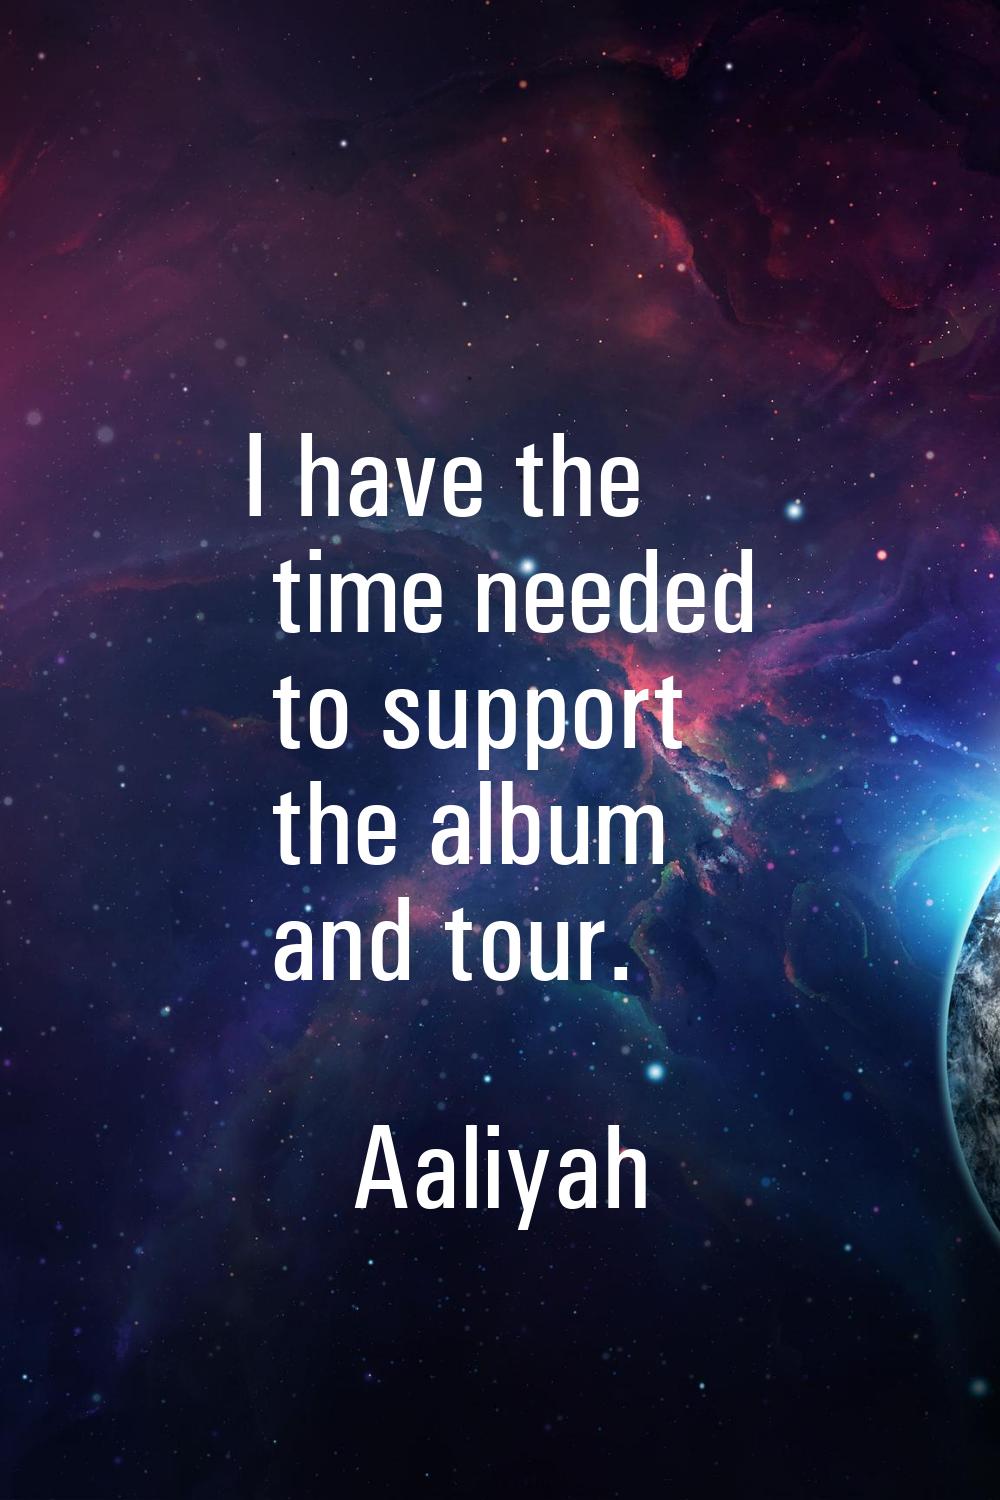 I have the time needed to support the album and tour.